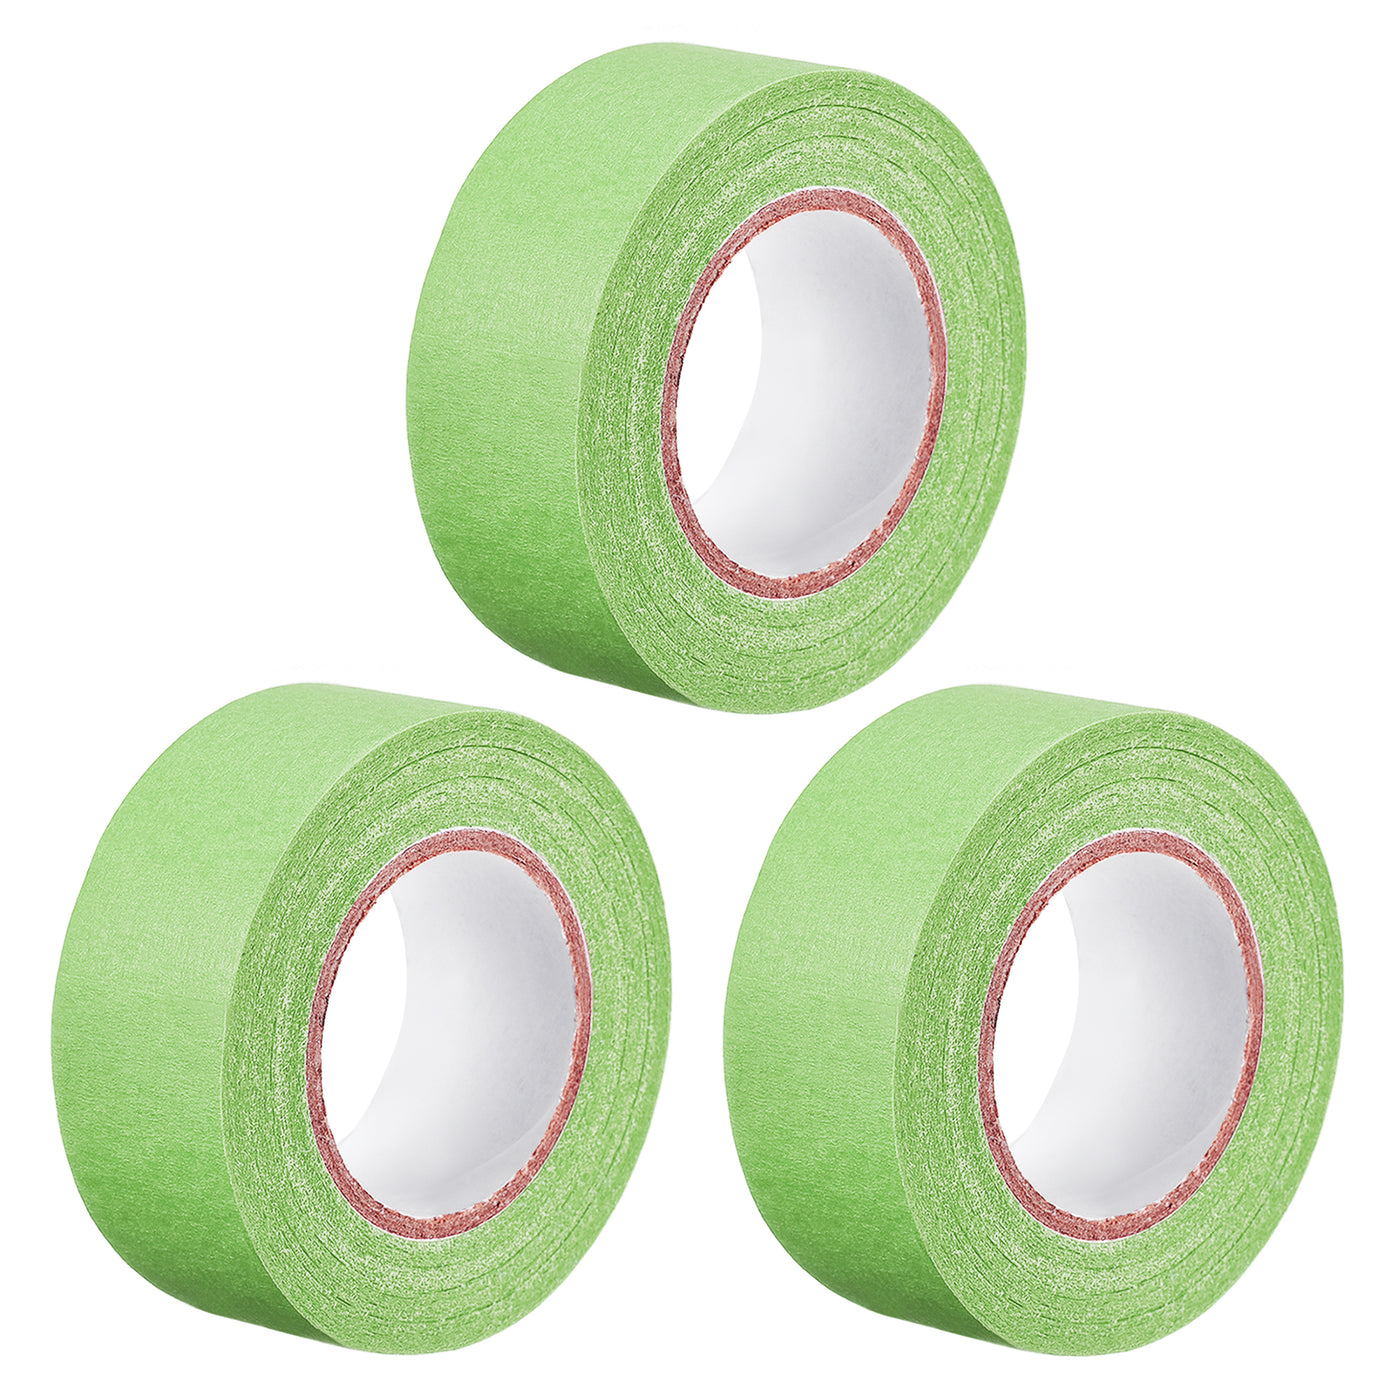 uxcell Uxcell 3Pcs 25mm 1 inch Wide 20m 21 Yards Masking Tape Painters Tape Rolls Light Green